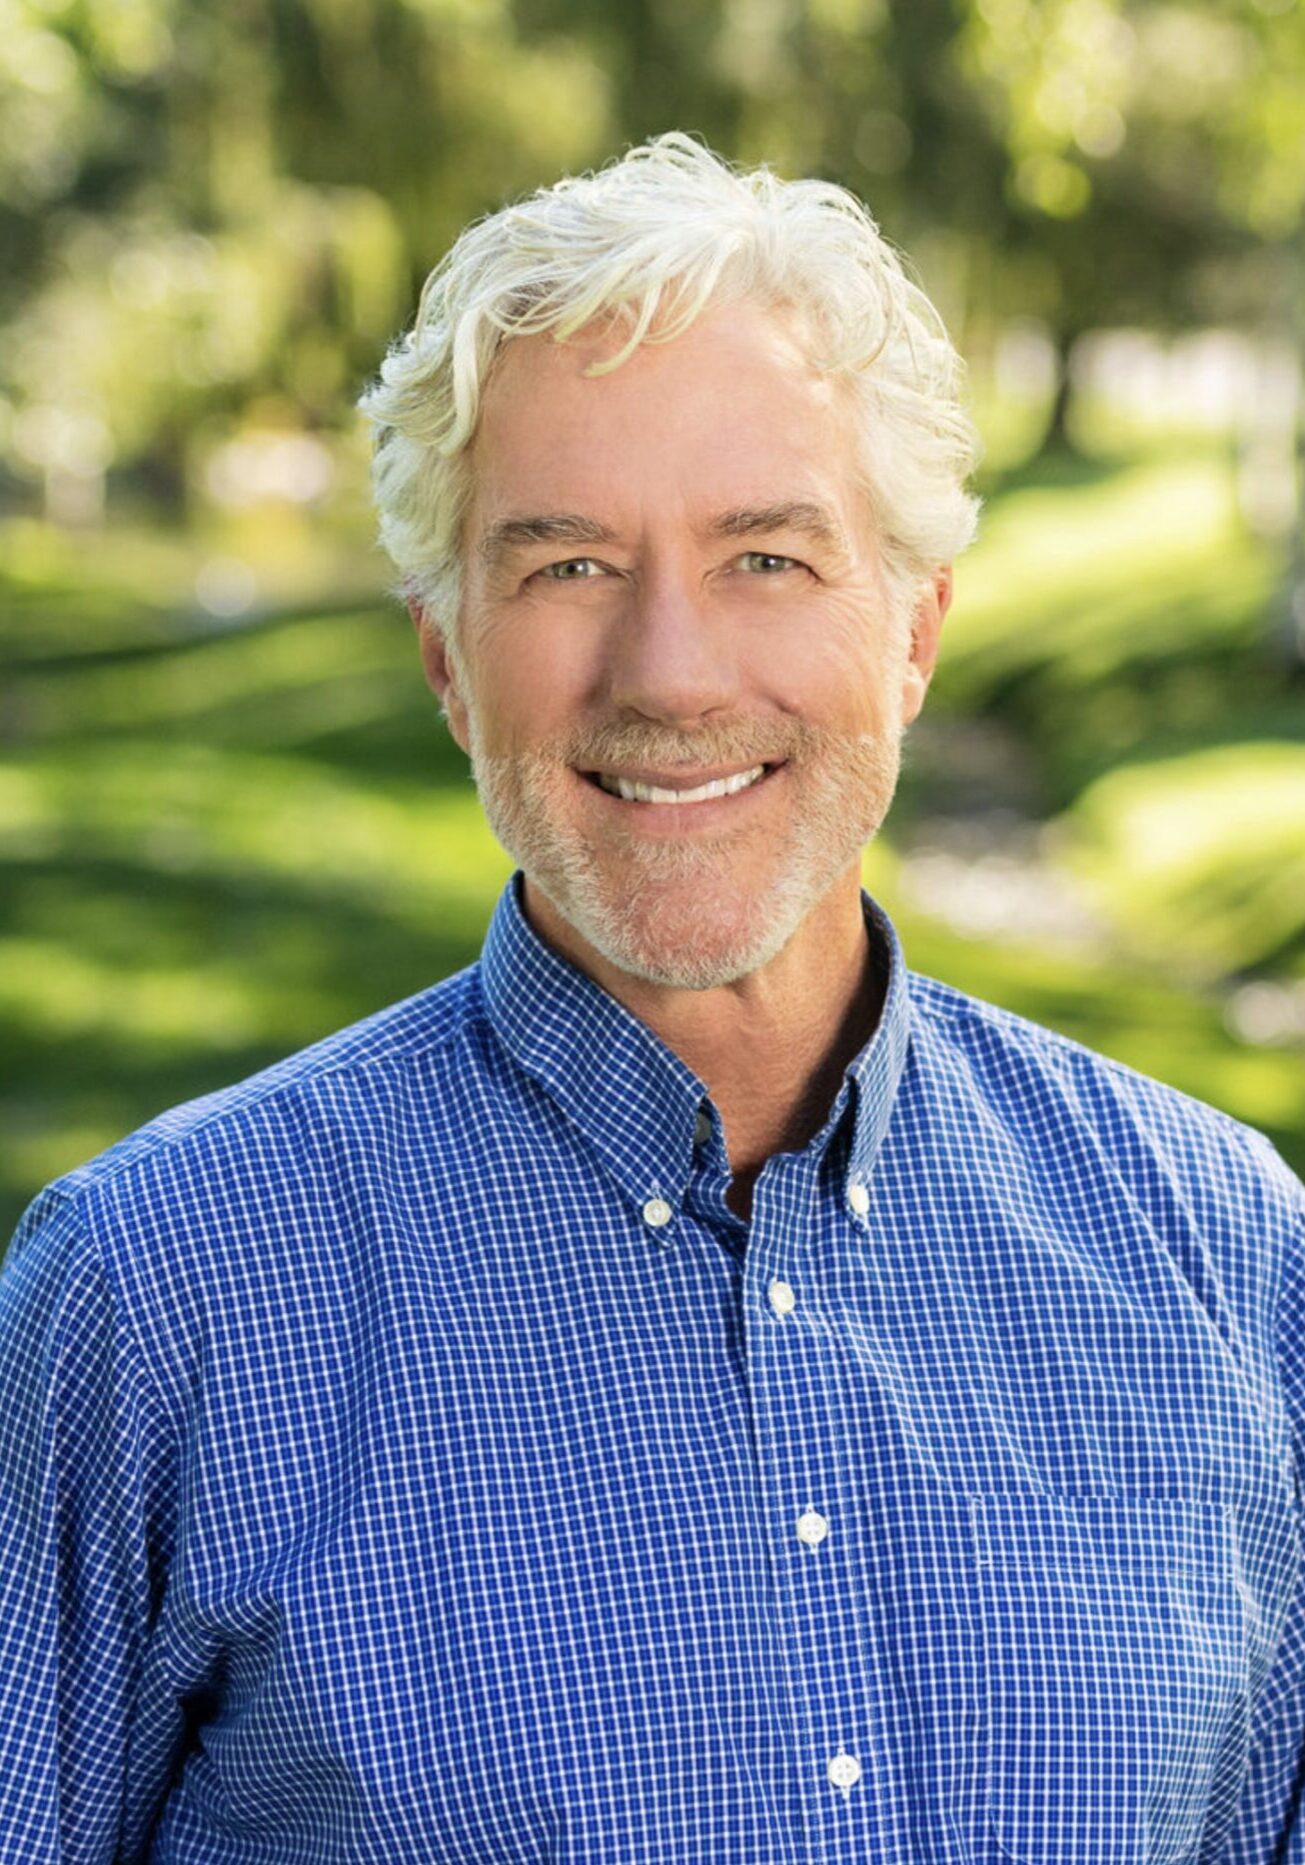 Cornelius Sheehan, LCSW is a therapist and founder / director of therapy in Reno, NV practice: Emotional & Relationship Health Associates. Reno, NV Specialist in Couple counseling